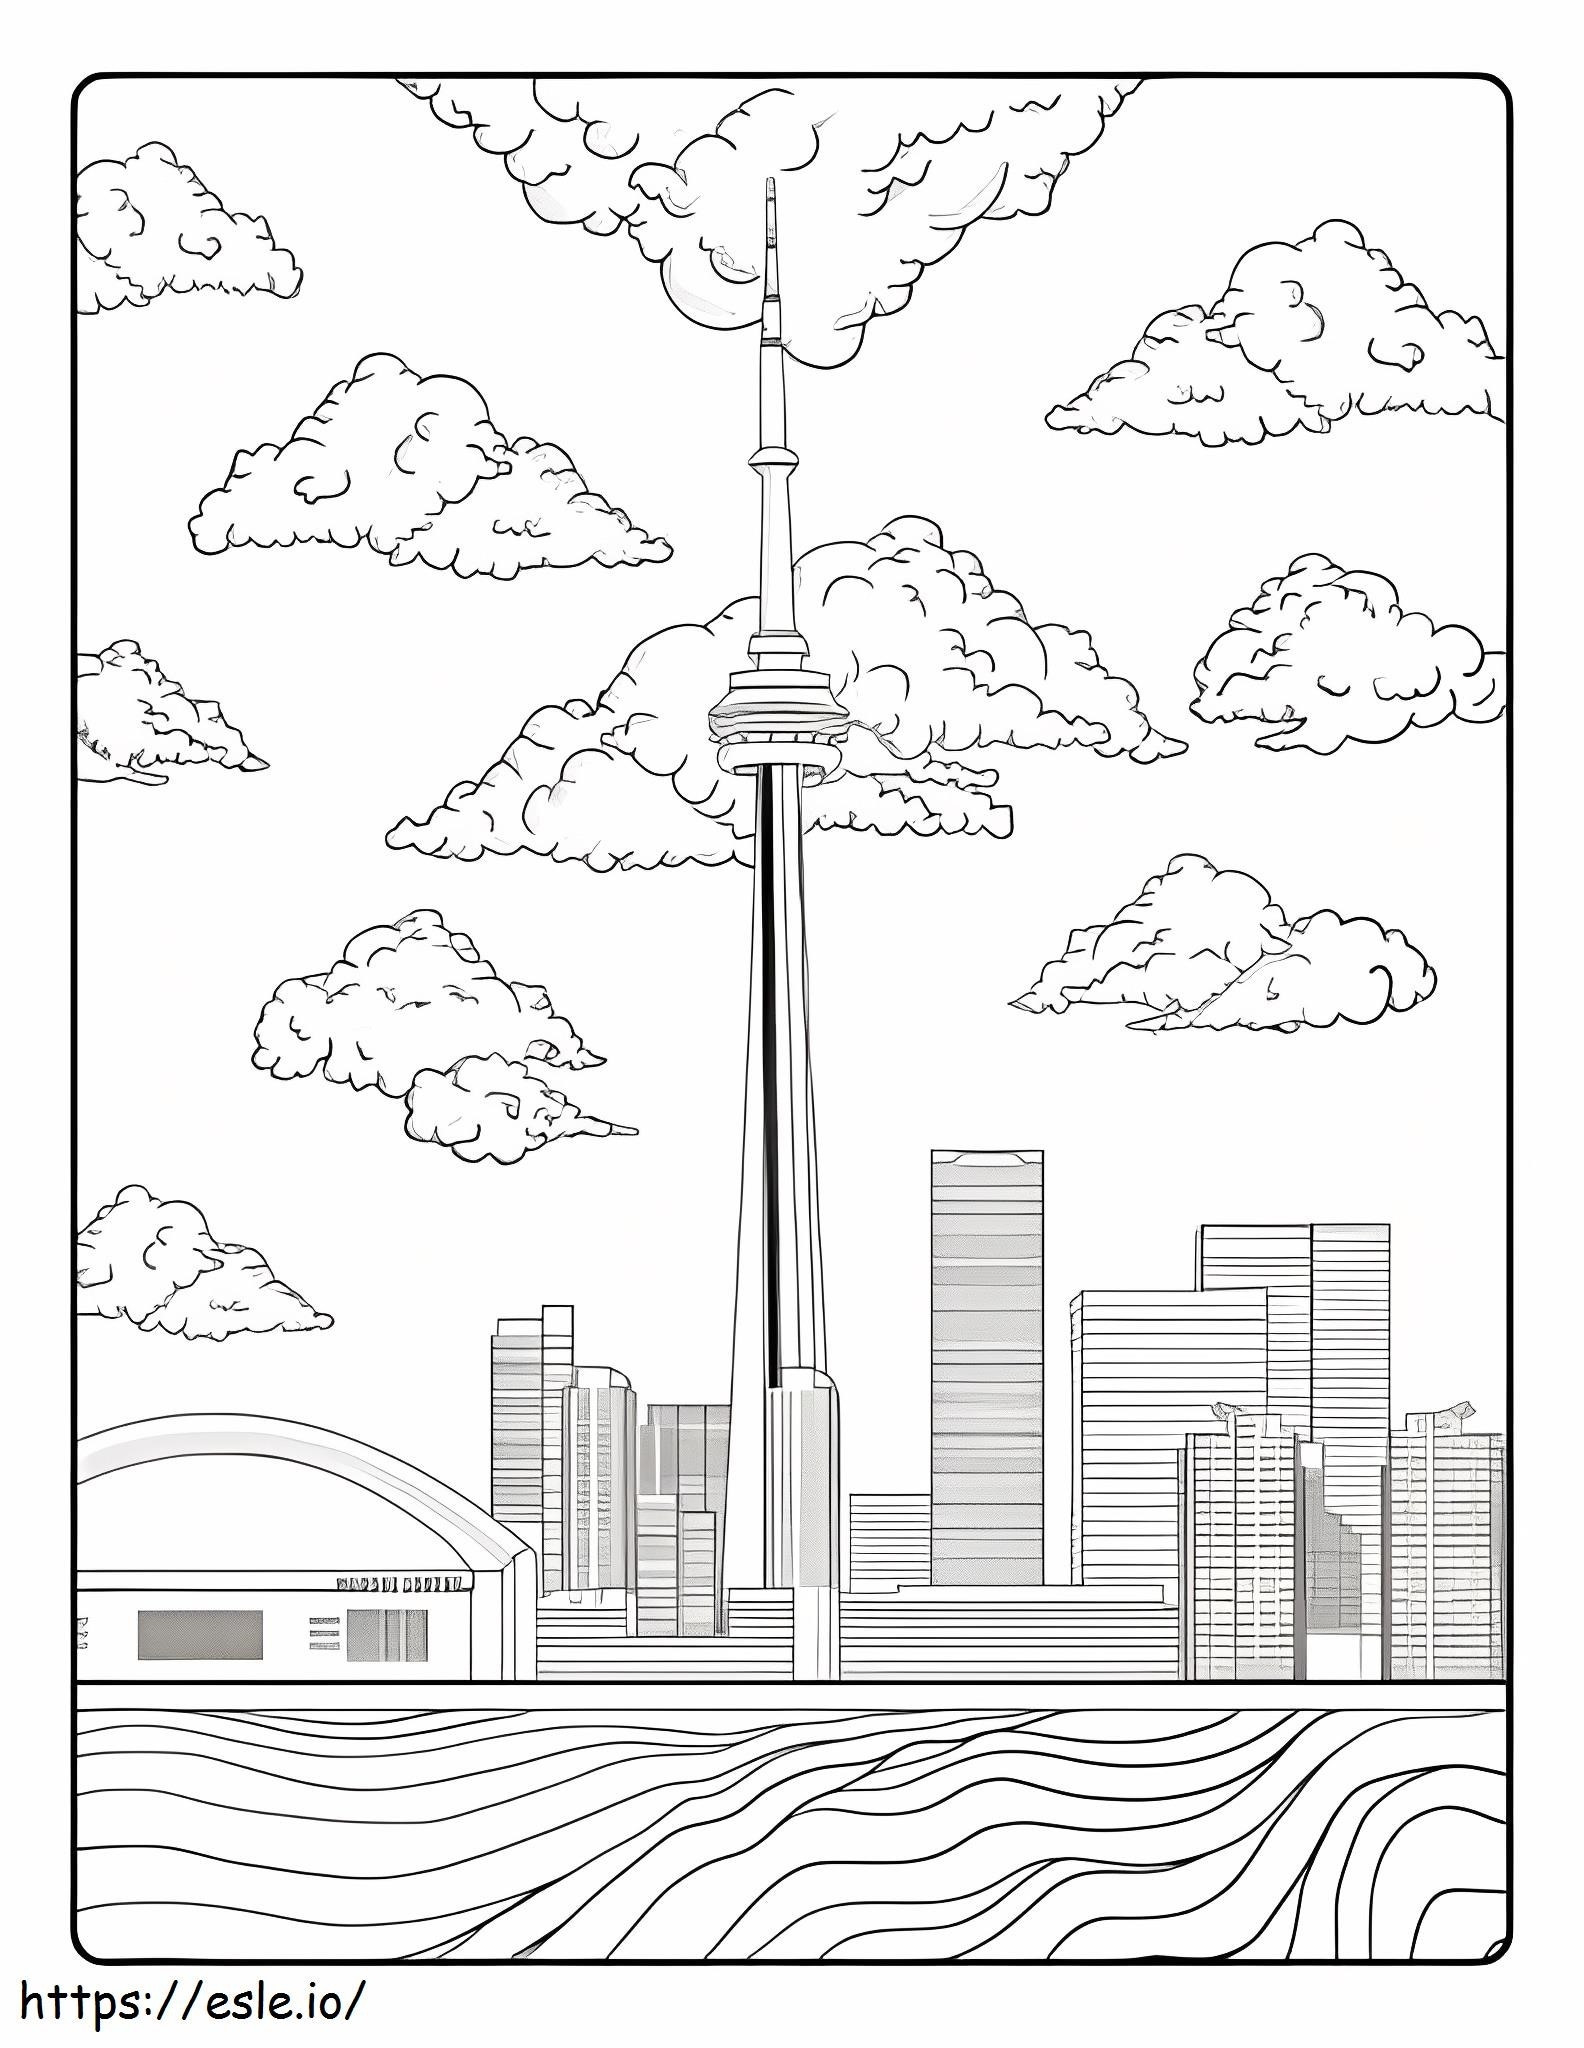 Toronto Tower coloring page